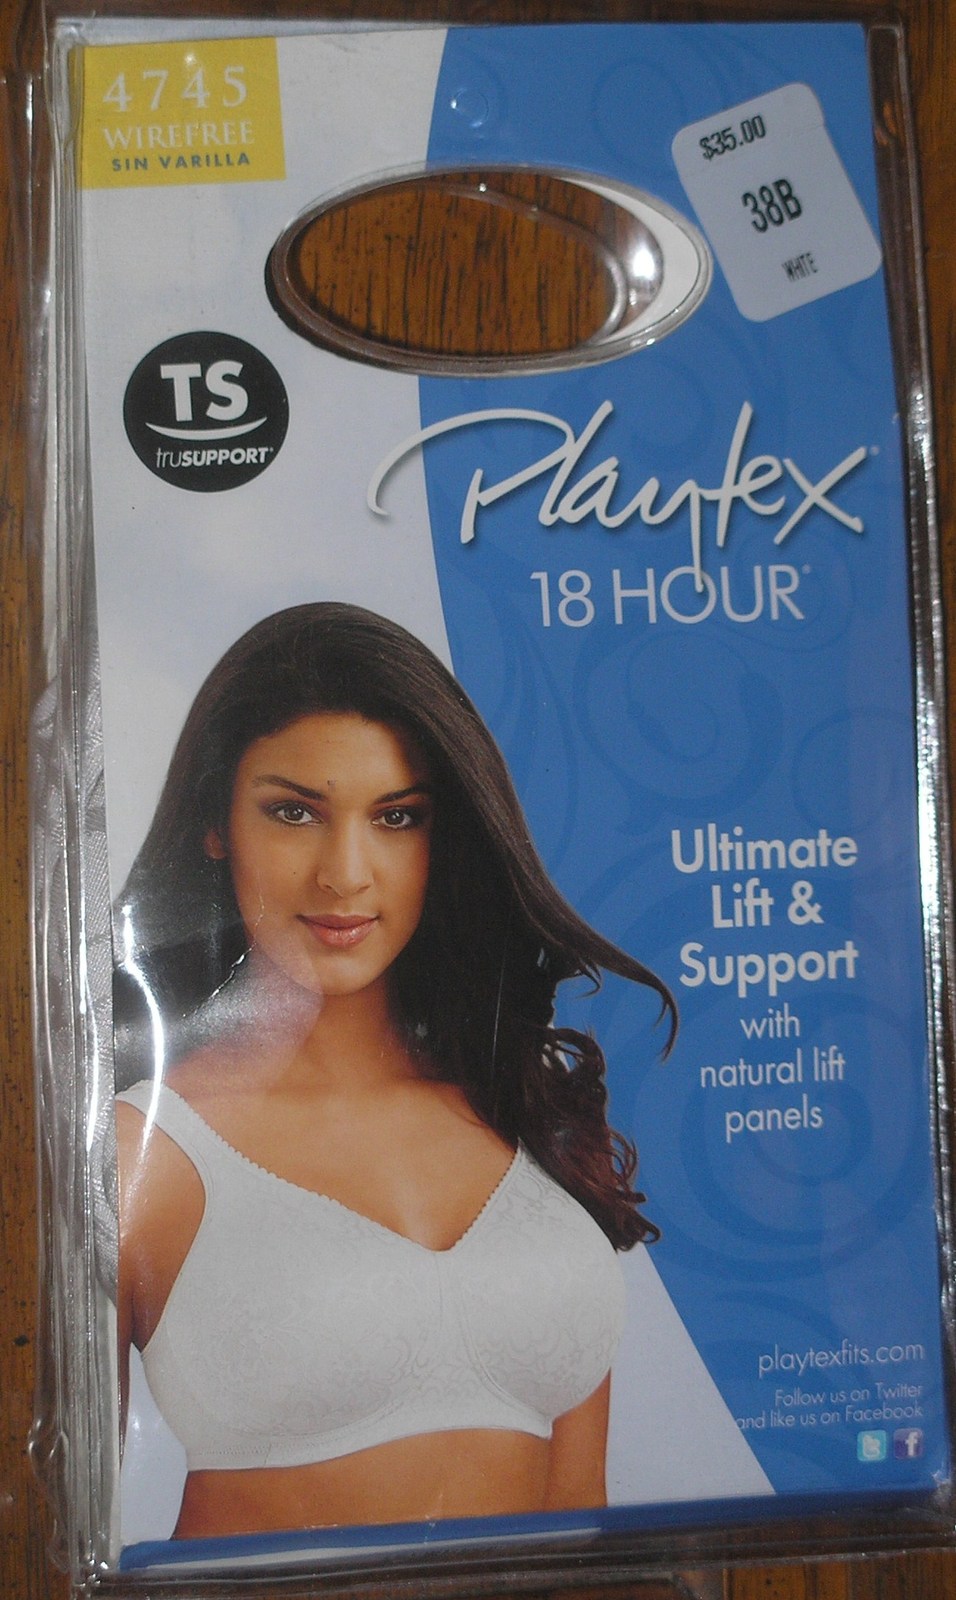 Playtex 18 Hour Bra White WireFree #4745 38B and 50 similar items